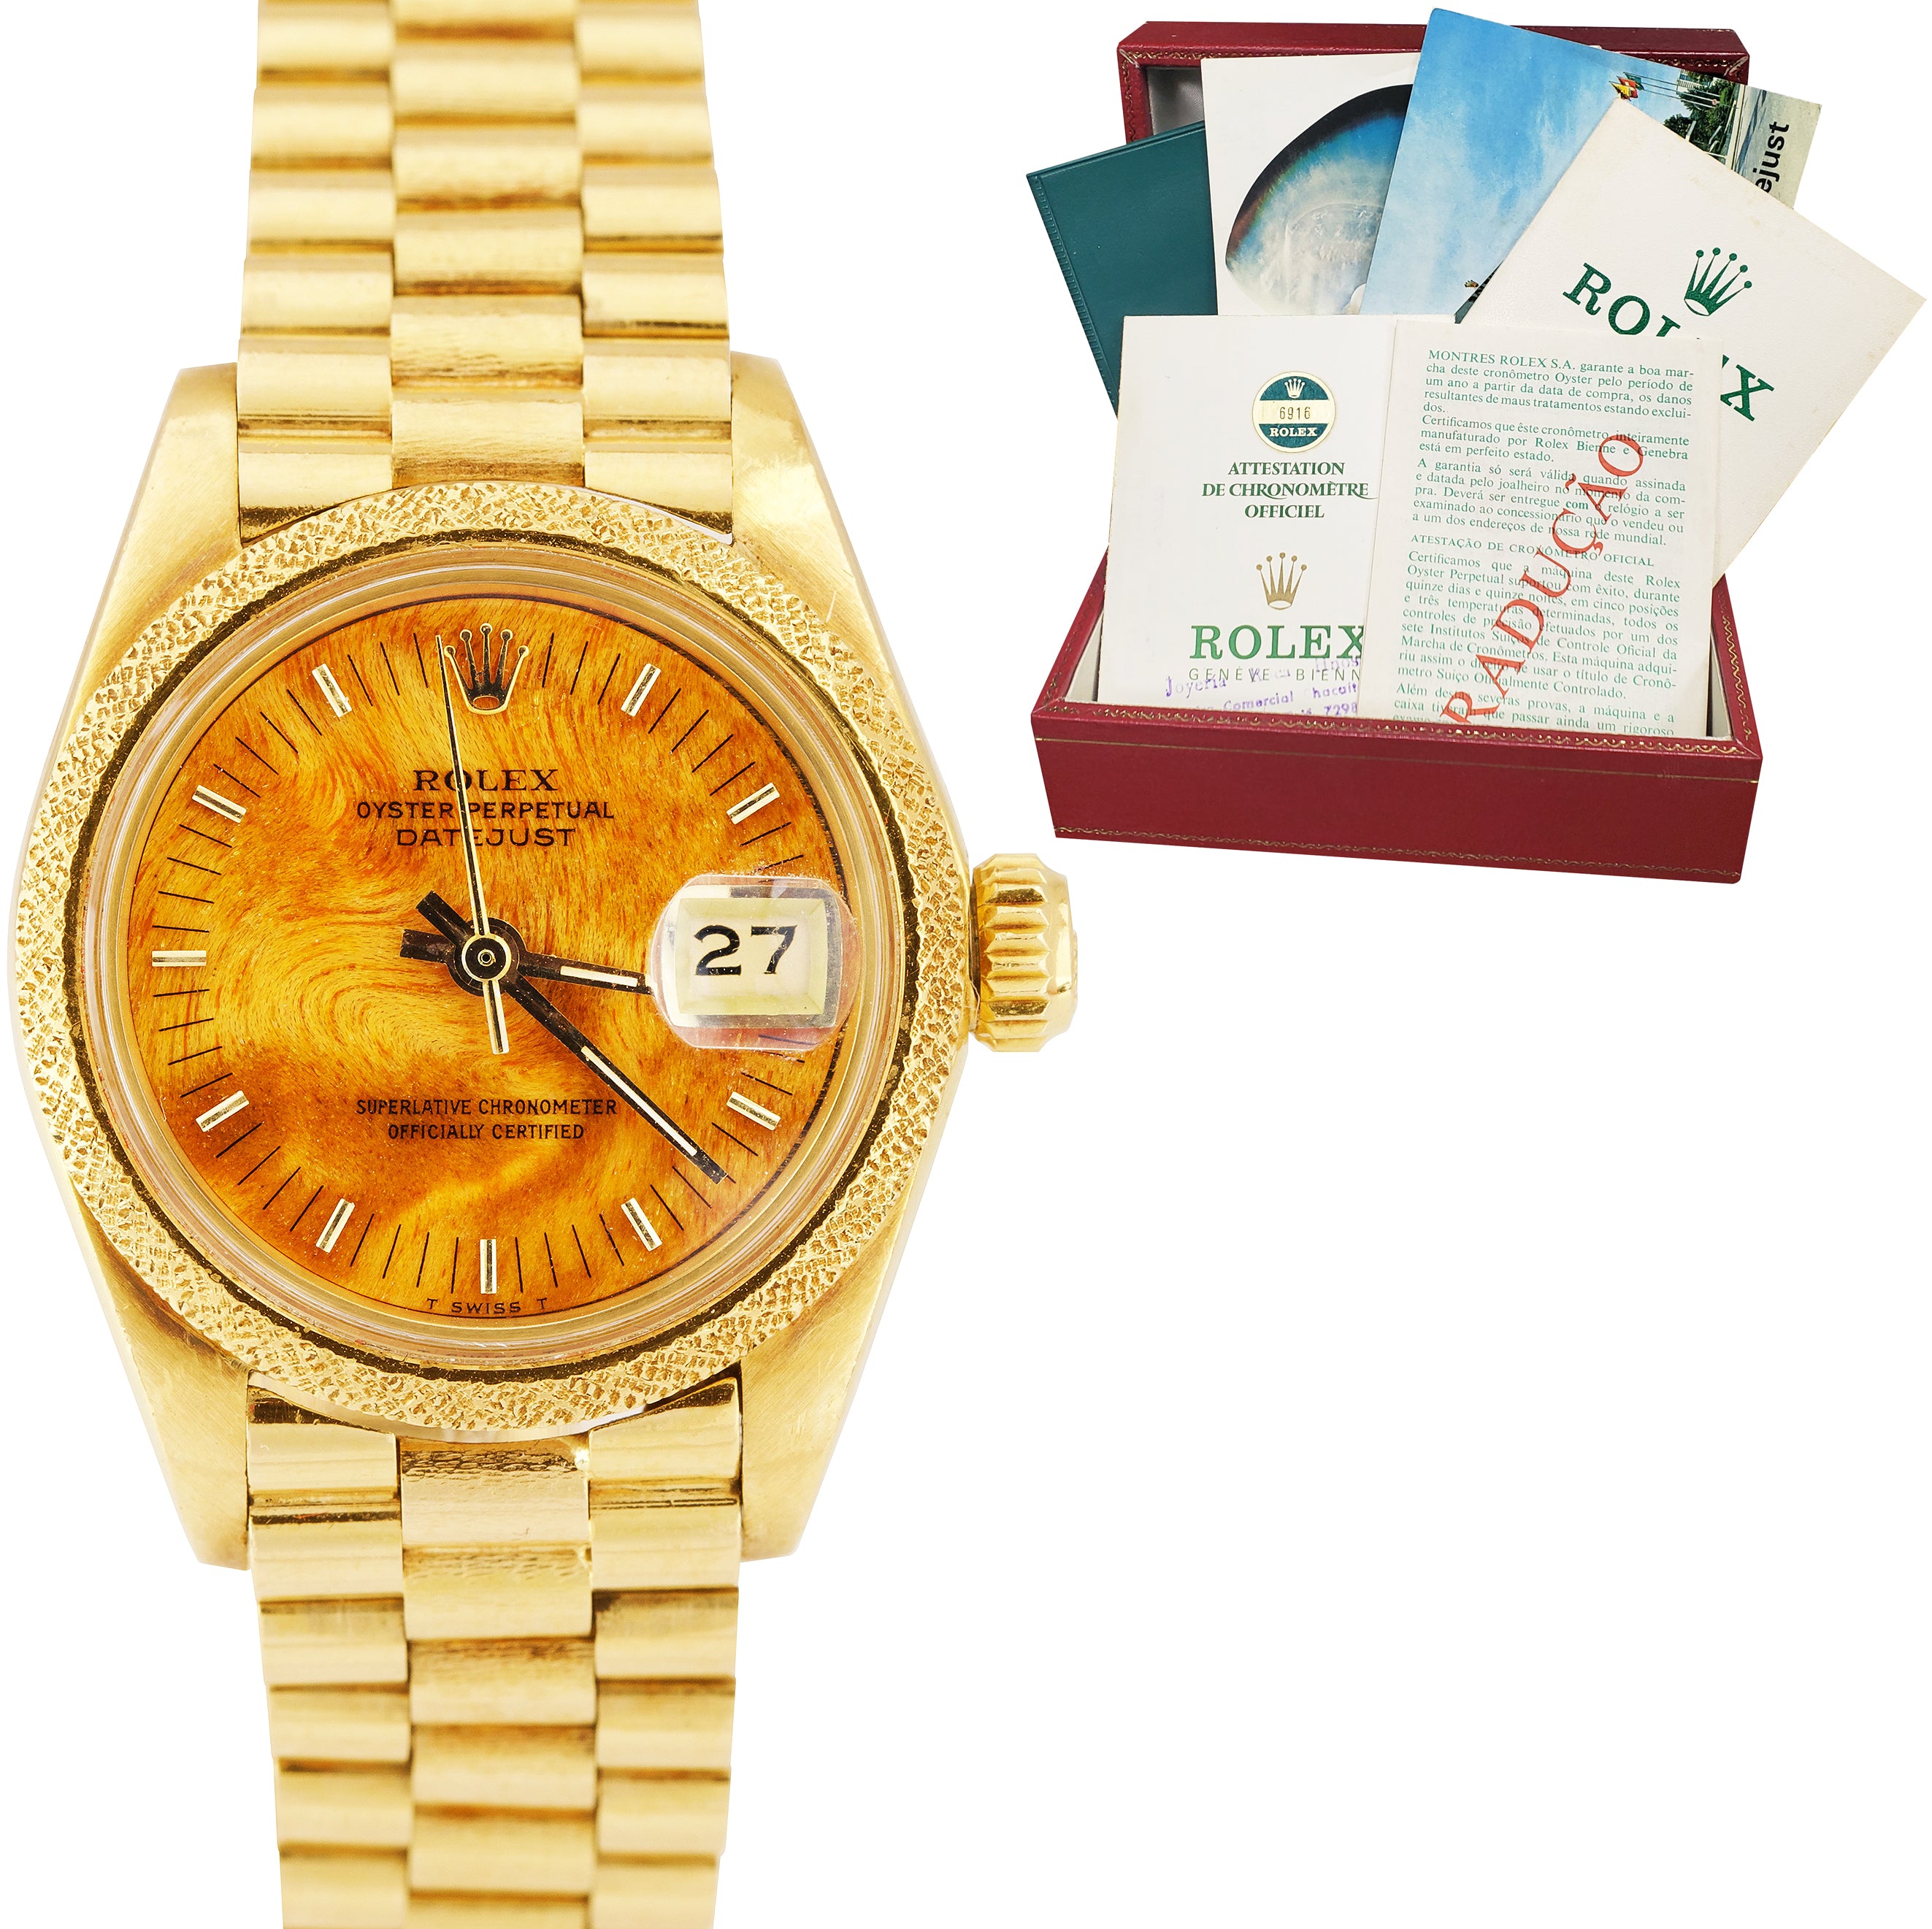 Pre-owned Rolex Oyster Perpetual Datejust (1966) Yellow Gold 6629